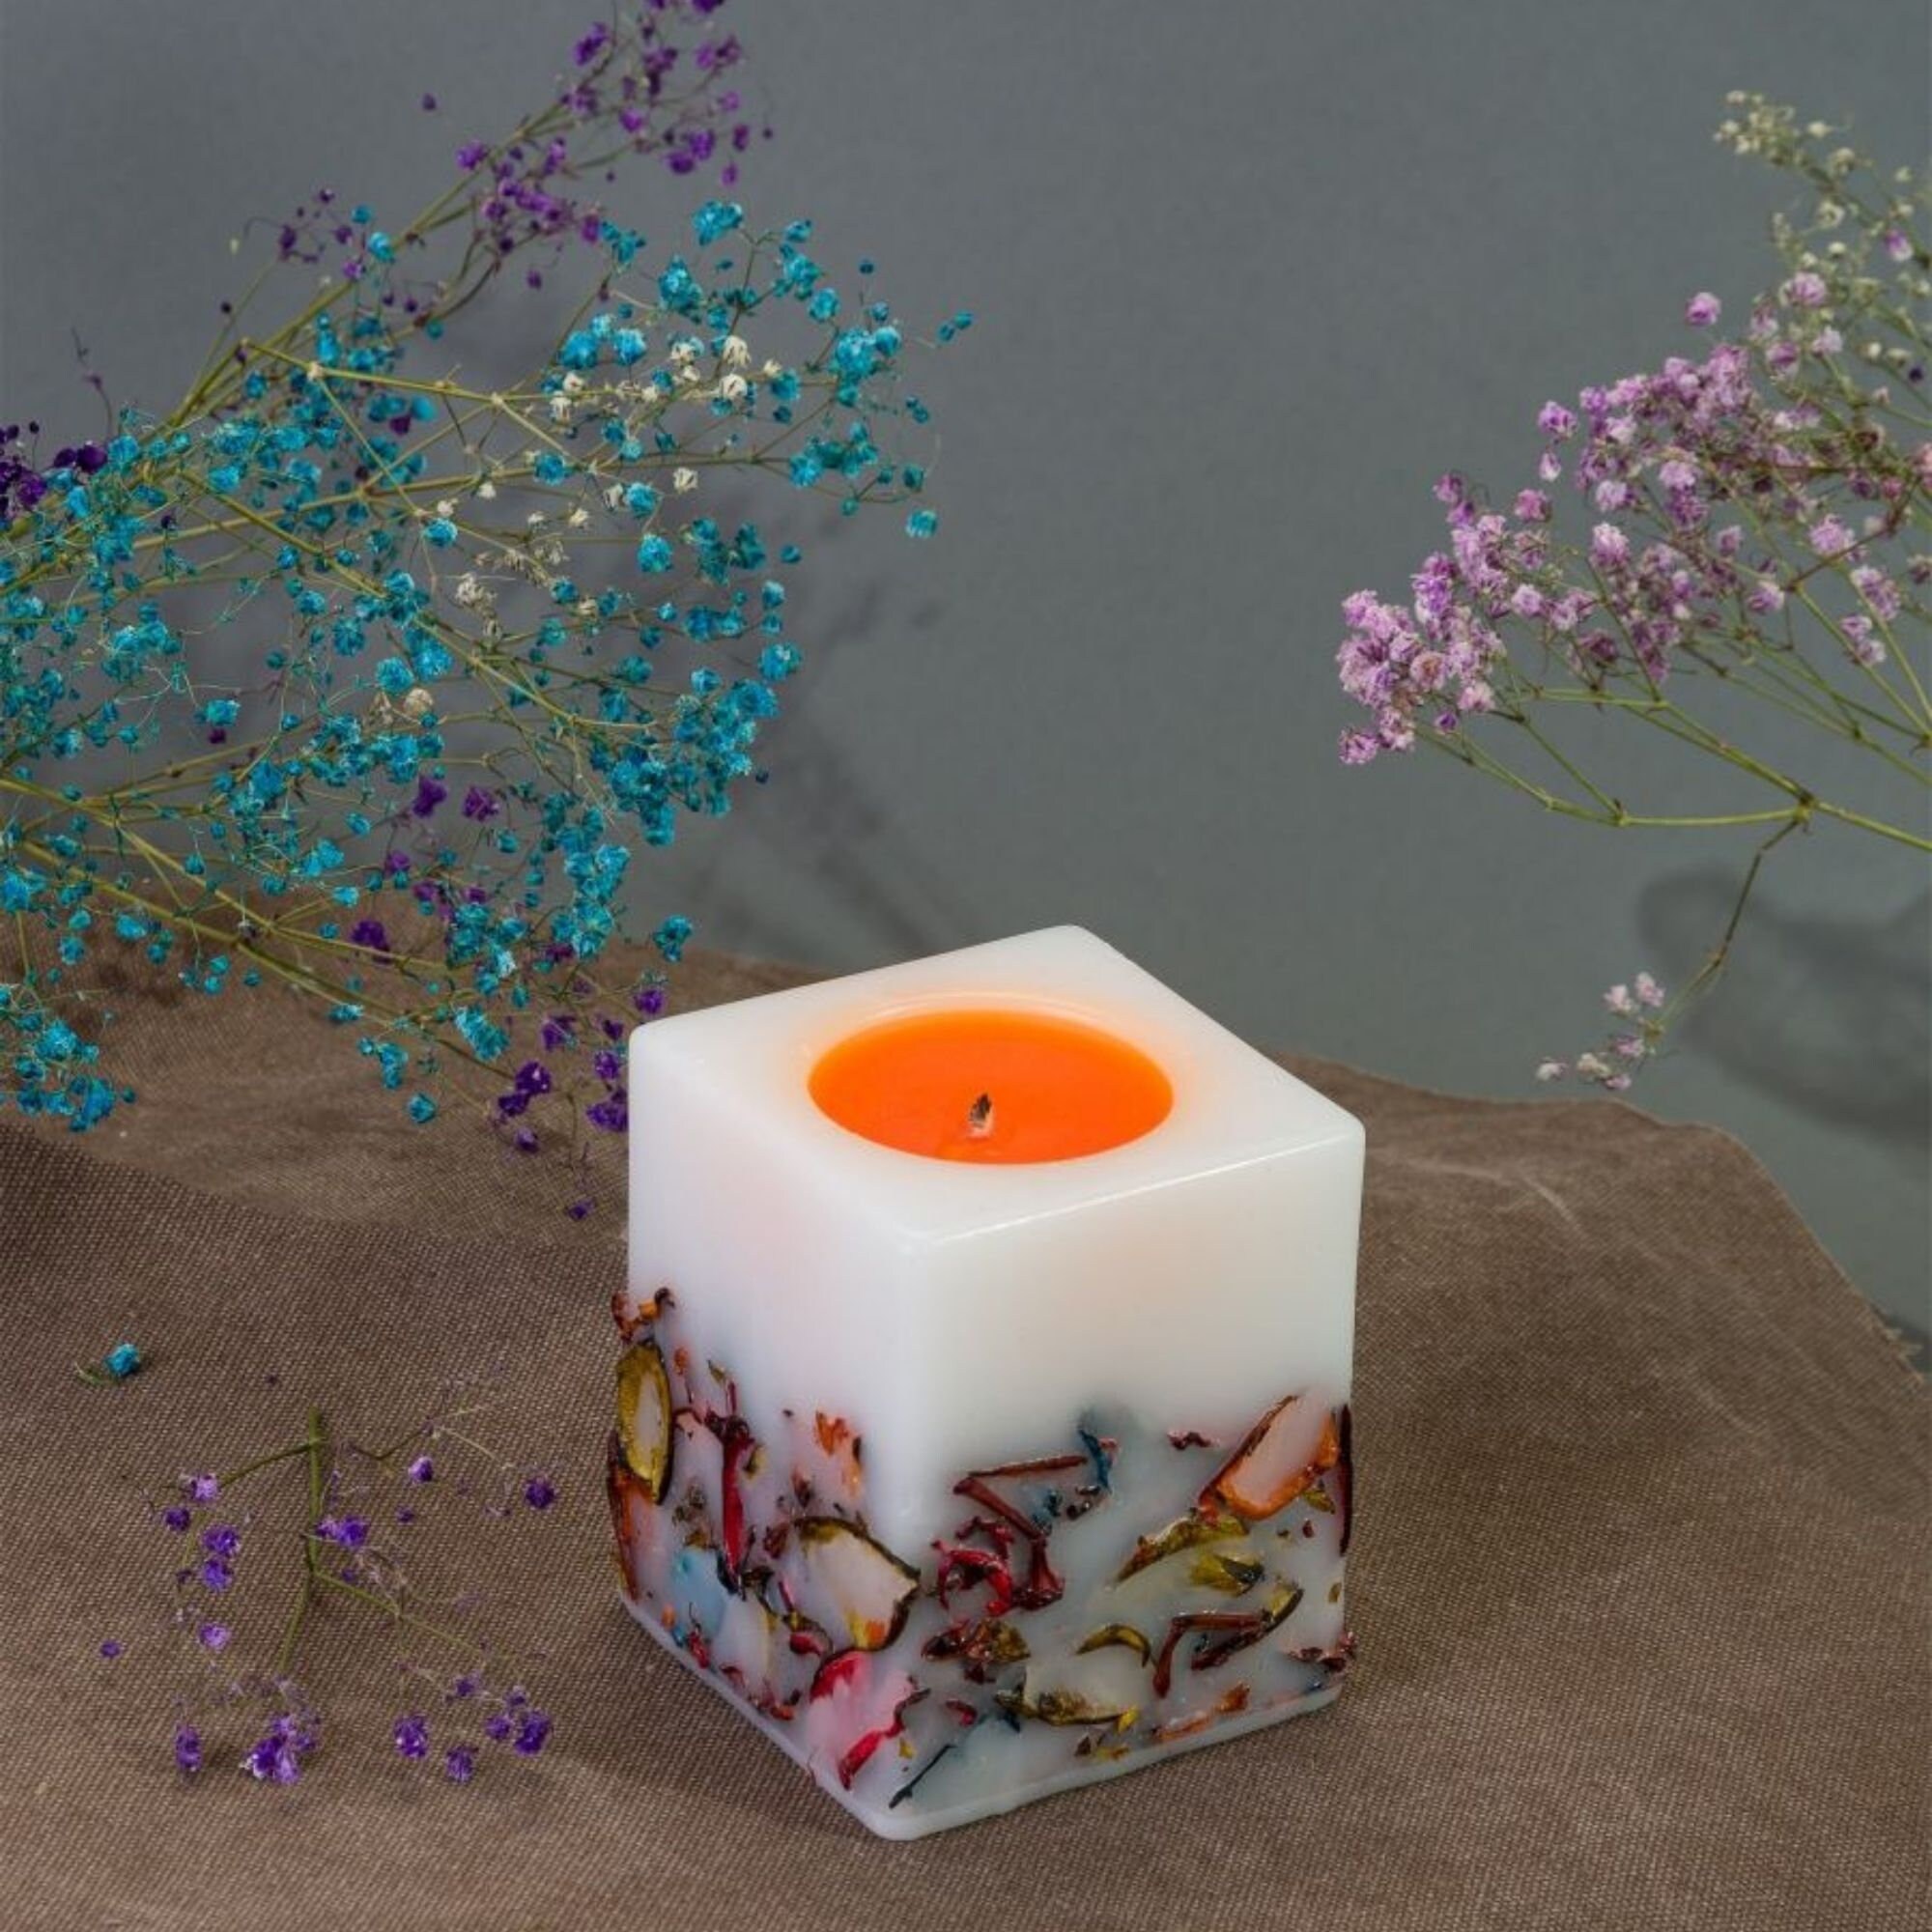 Handmade floral wax candle with dried flowers – купить на Ярмарке Мастеров  – SM3LQCOM